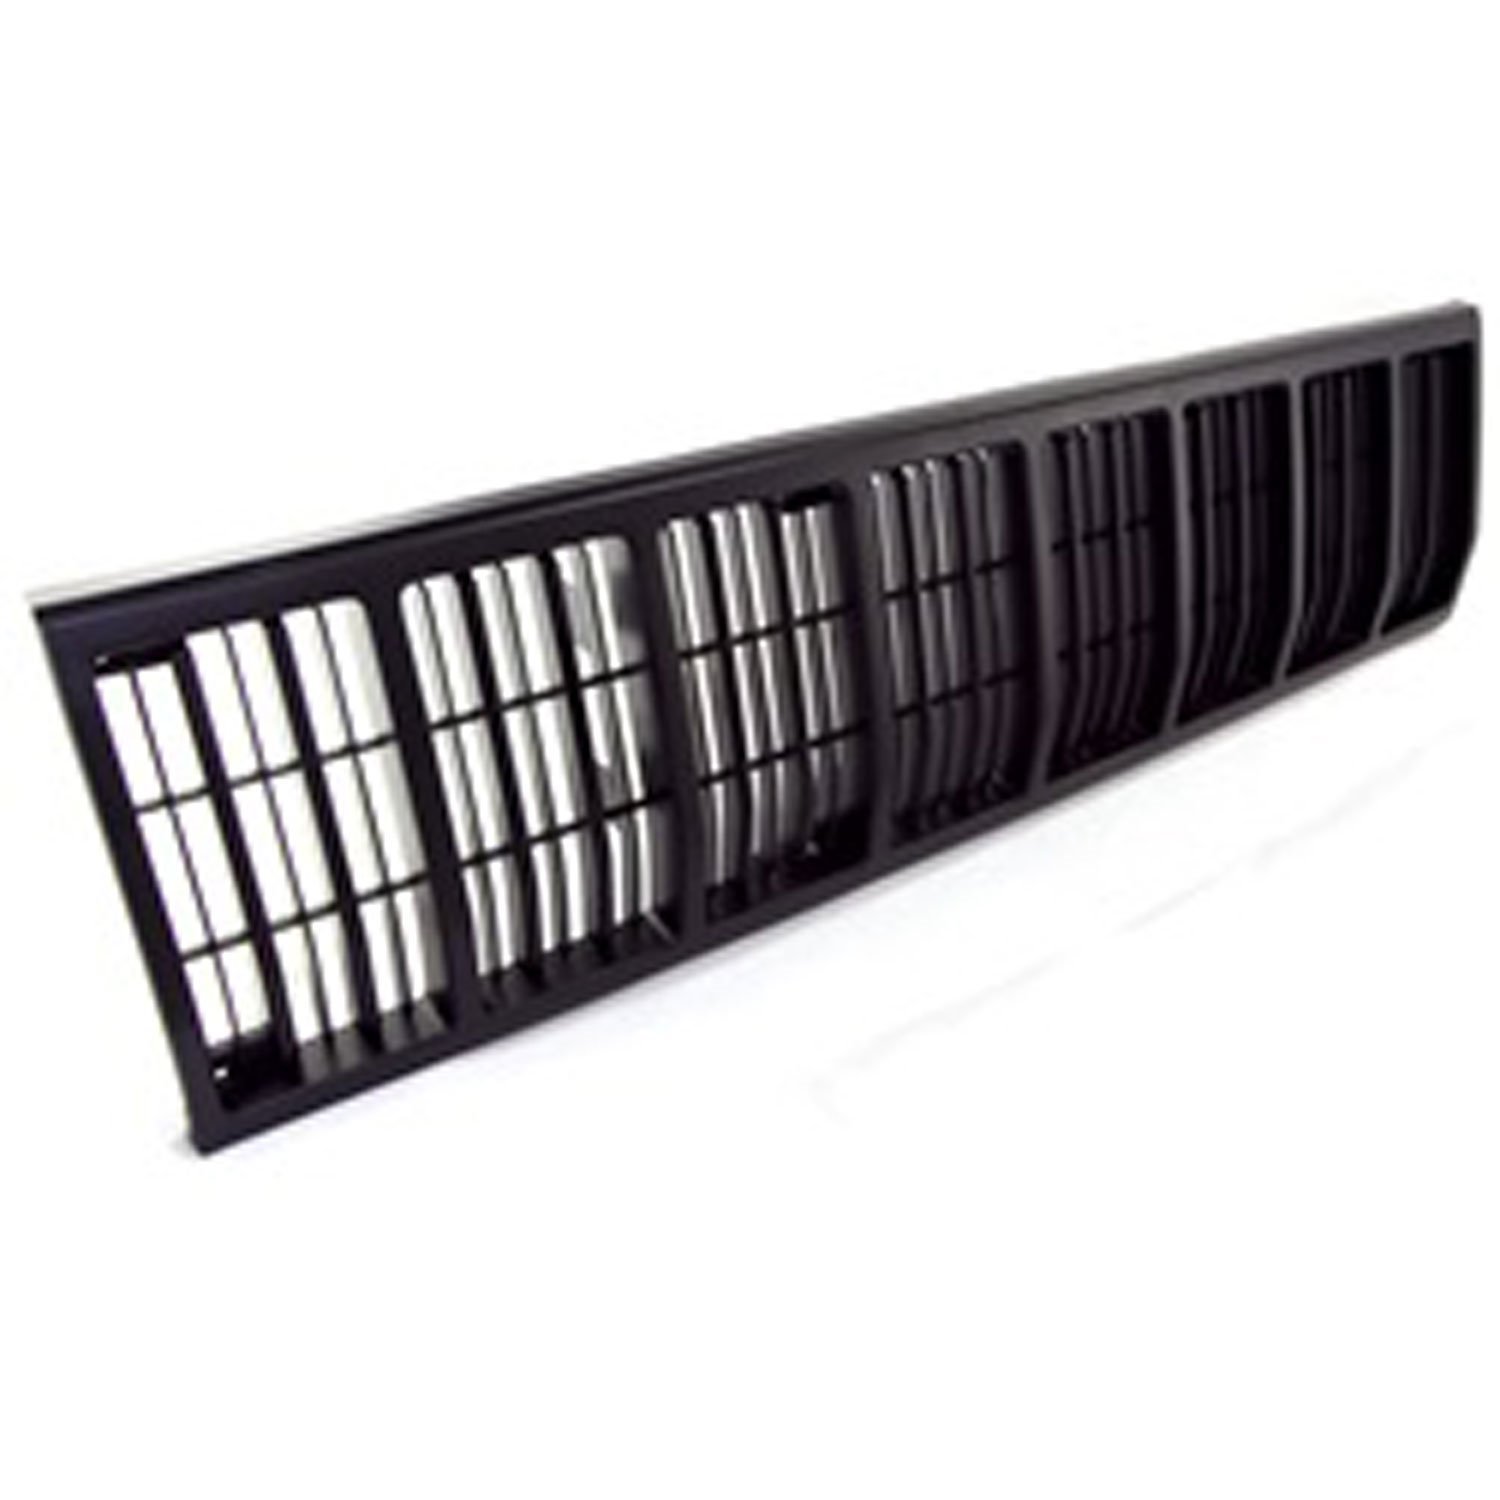 This black grille insert from Omix-ADA fits 88-90 Jeep Cherokee XJ.